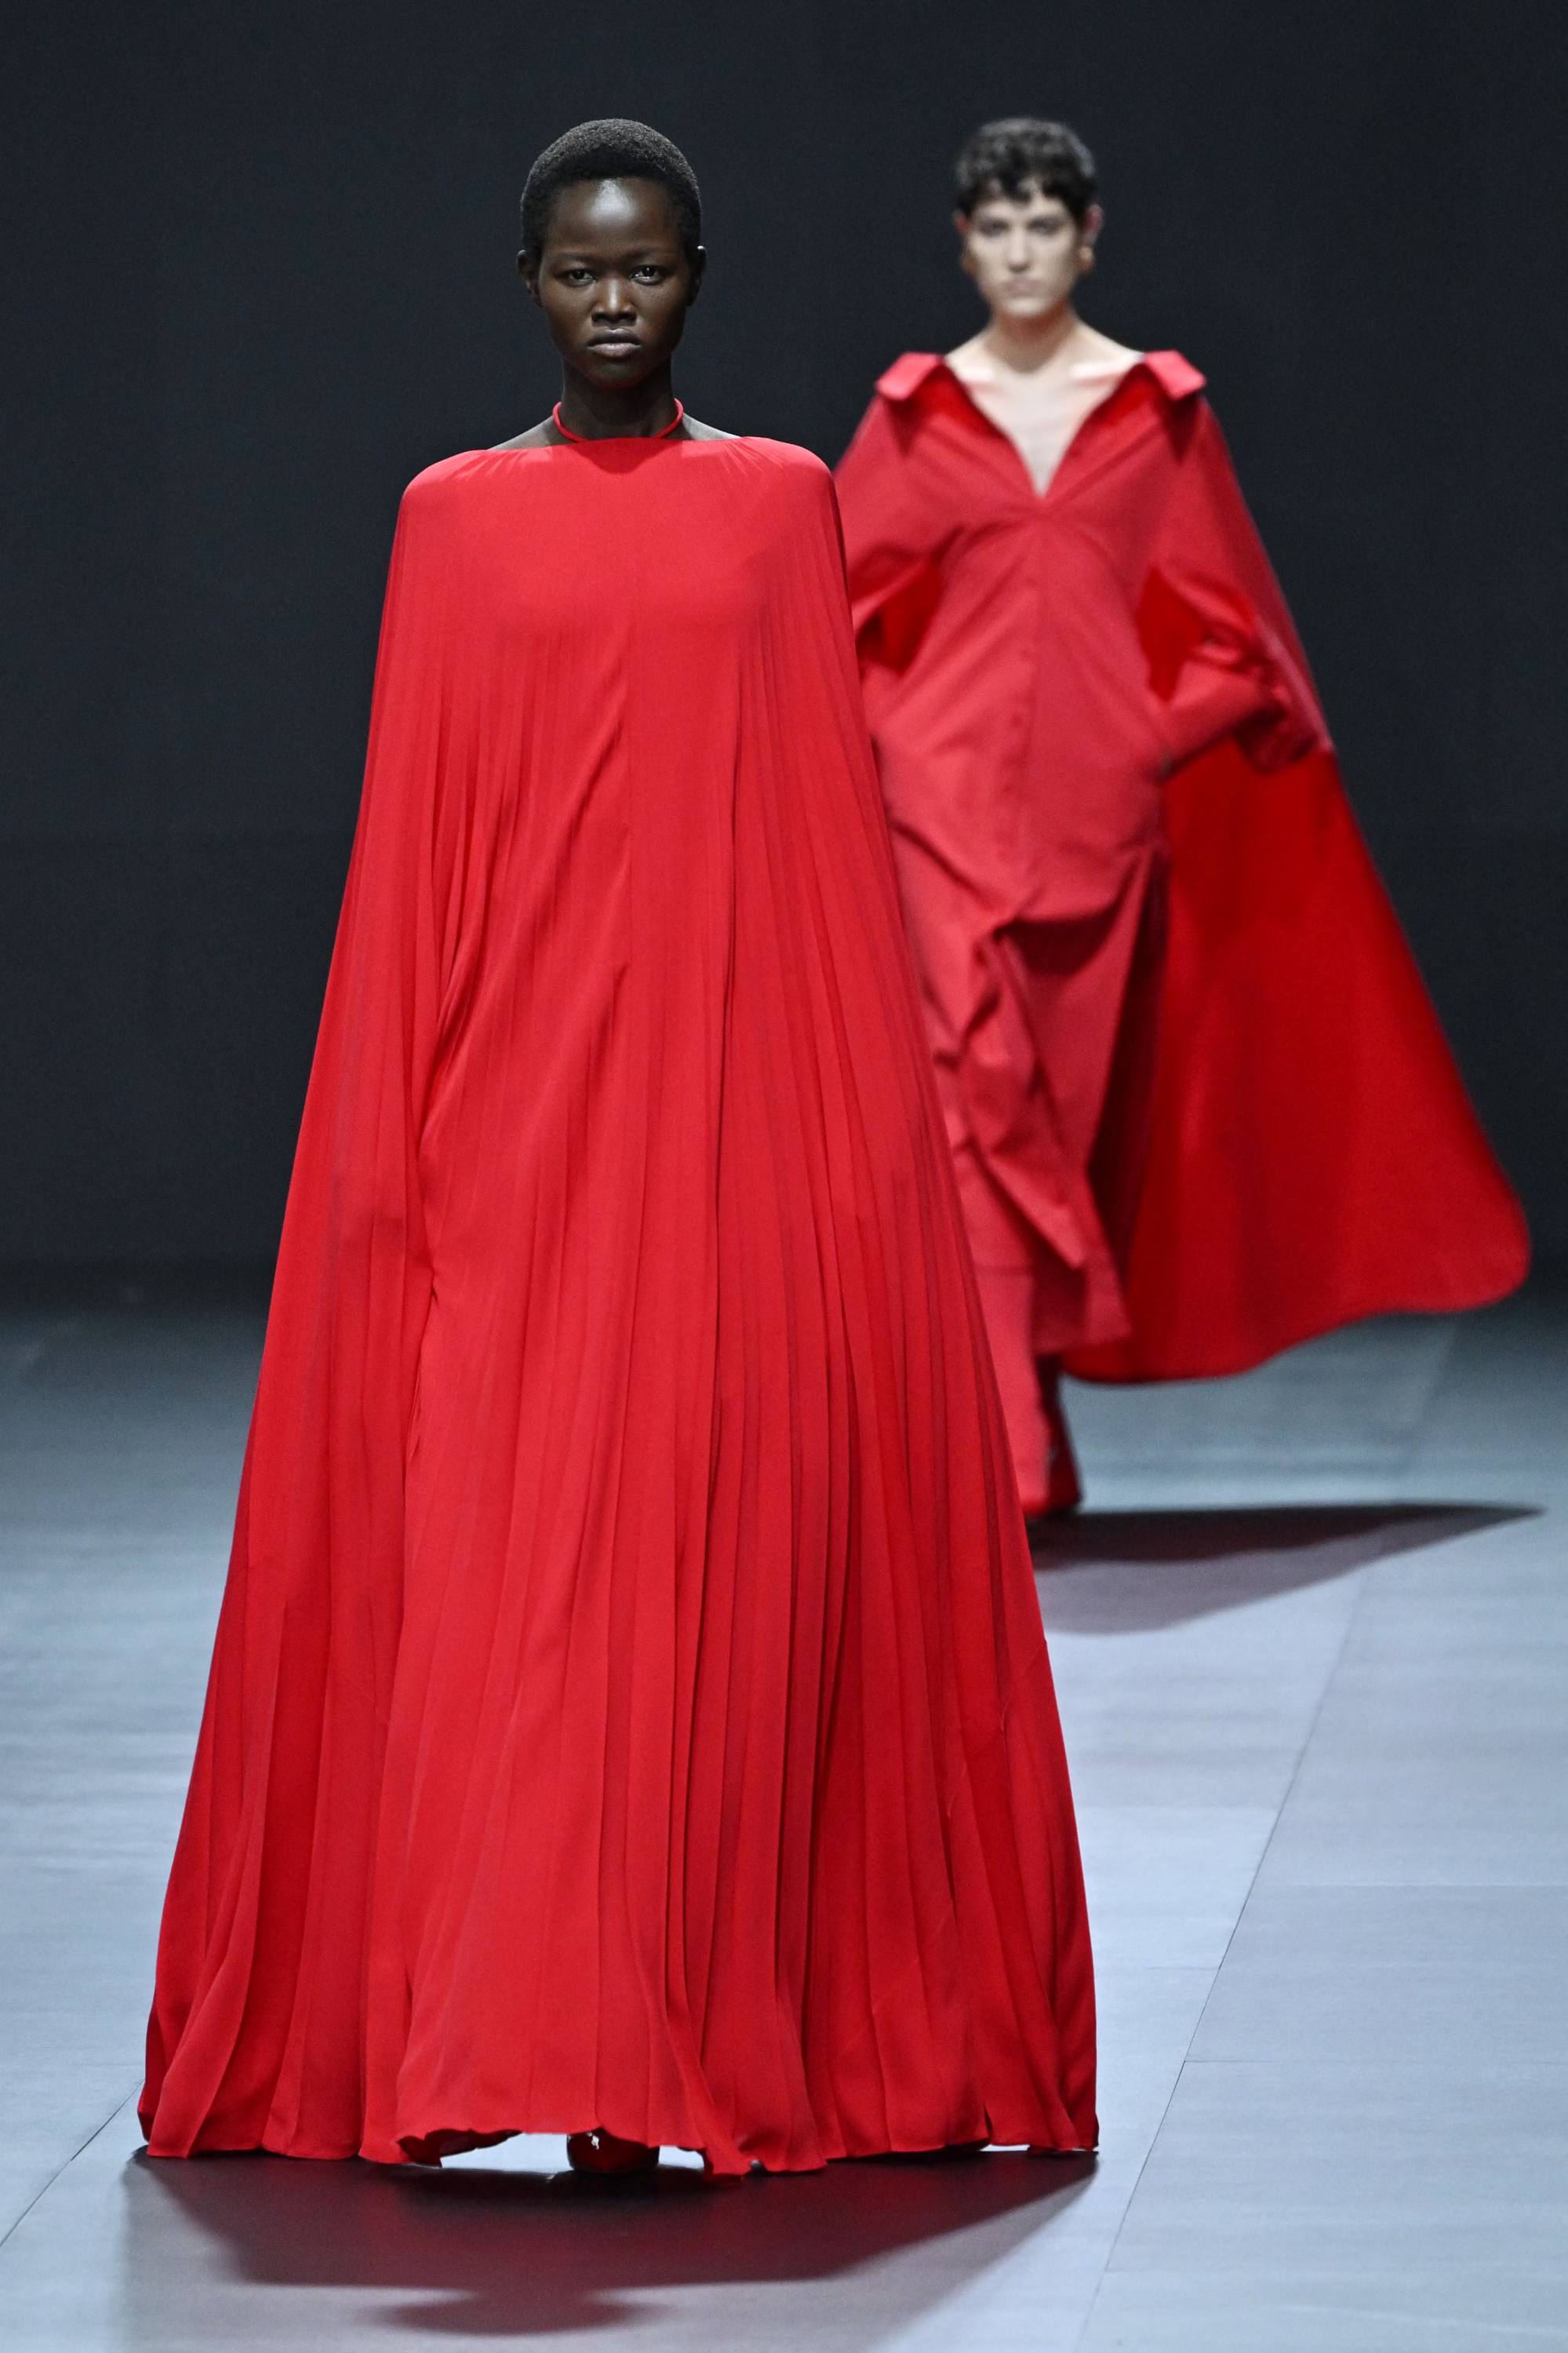 What is Red and how did it come to be? The fashion brand's red worn by Rihanna, Scarlett Johansson, Nicole Kidman and Penélope Cruz, are so iconic that Pantone recognises